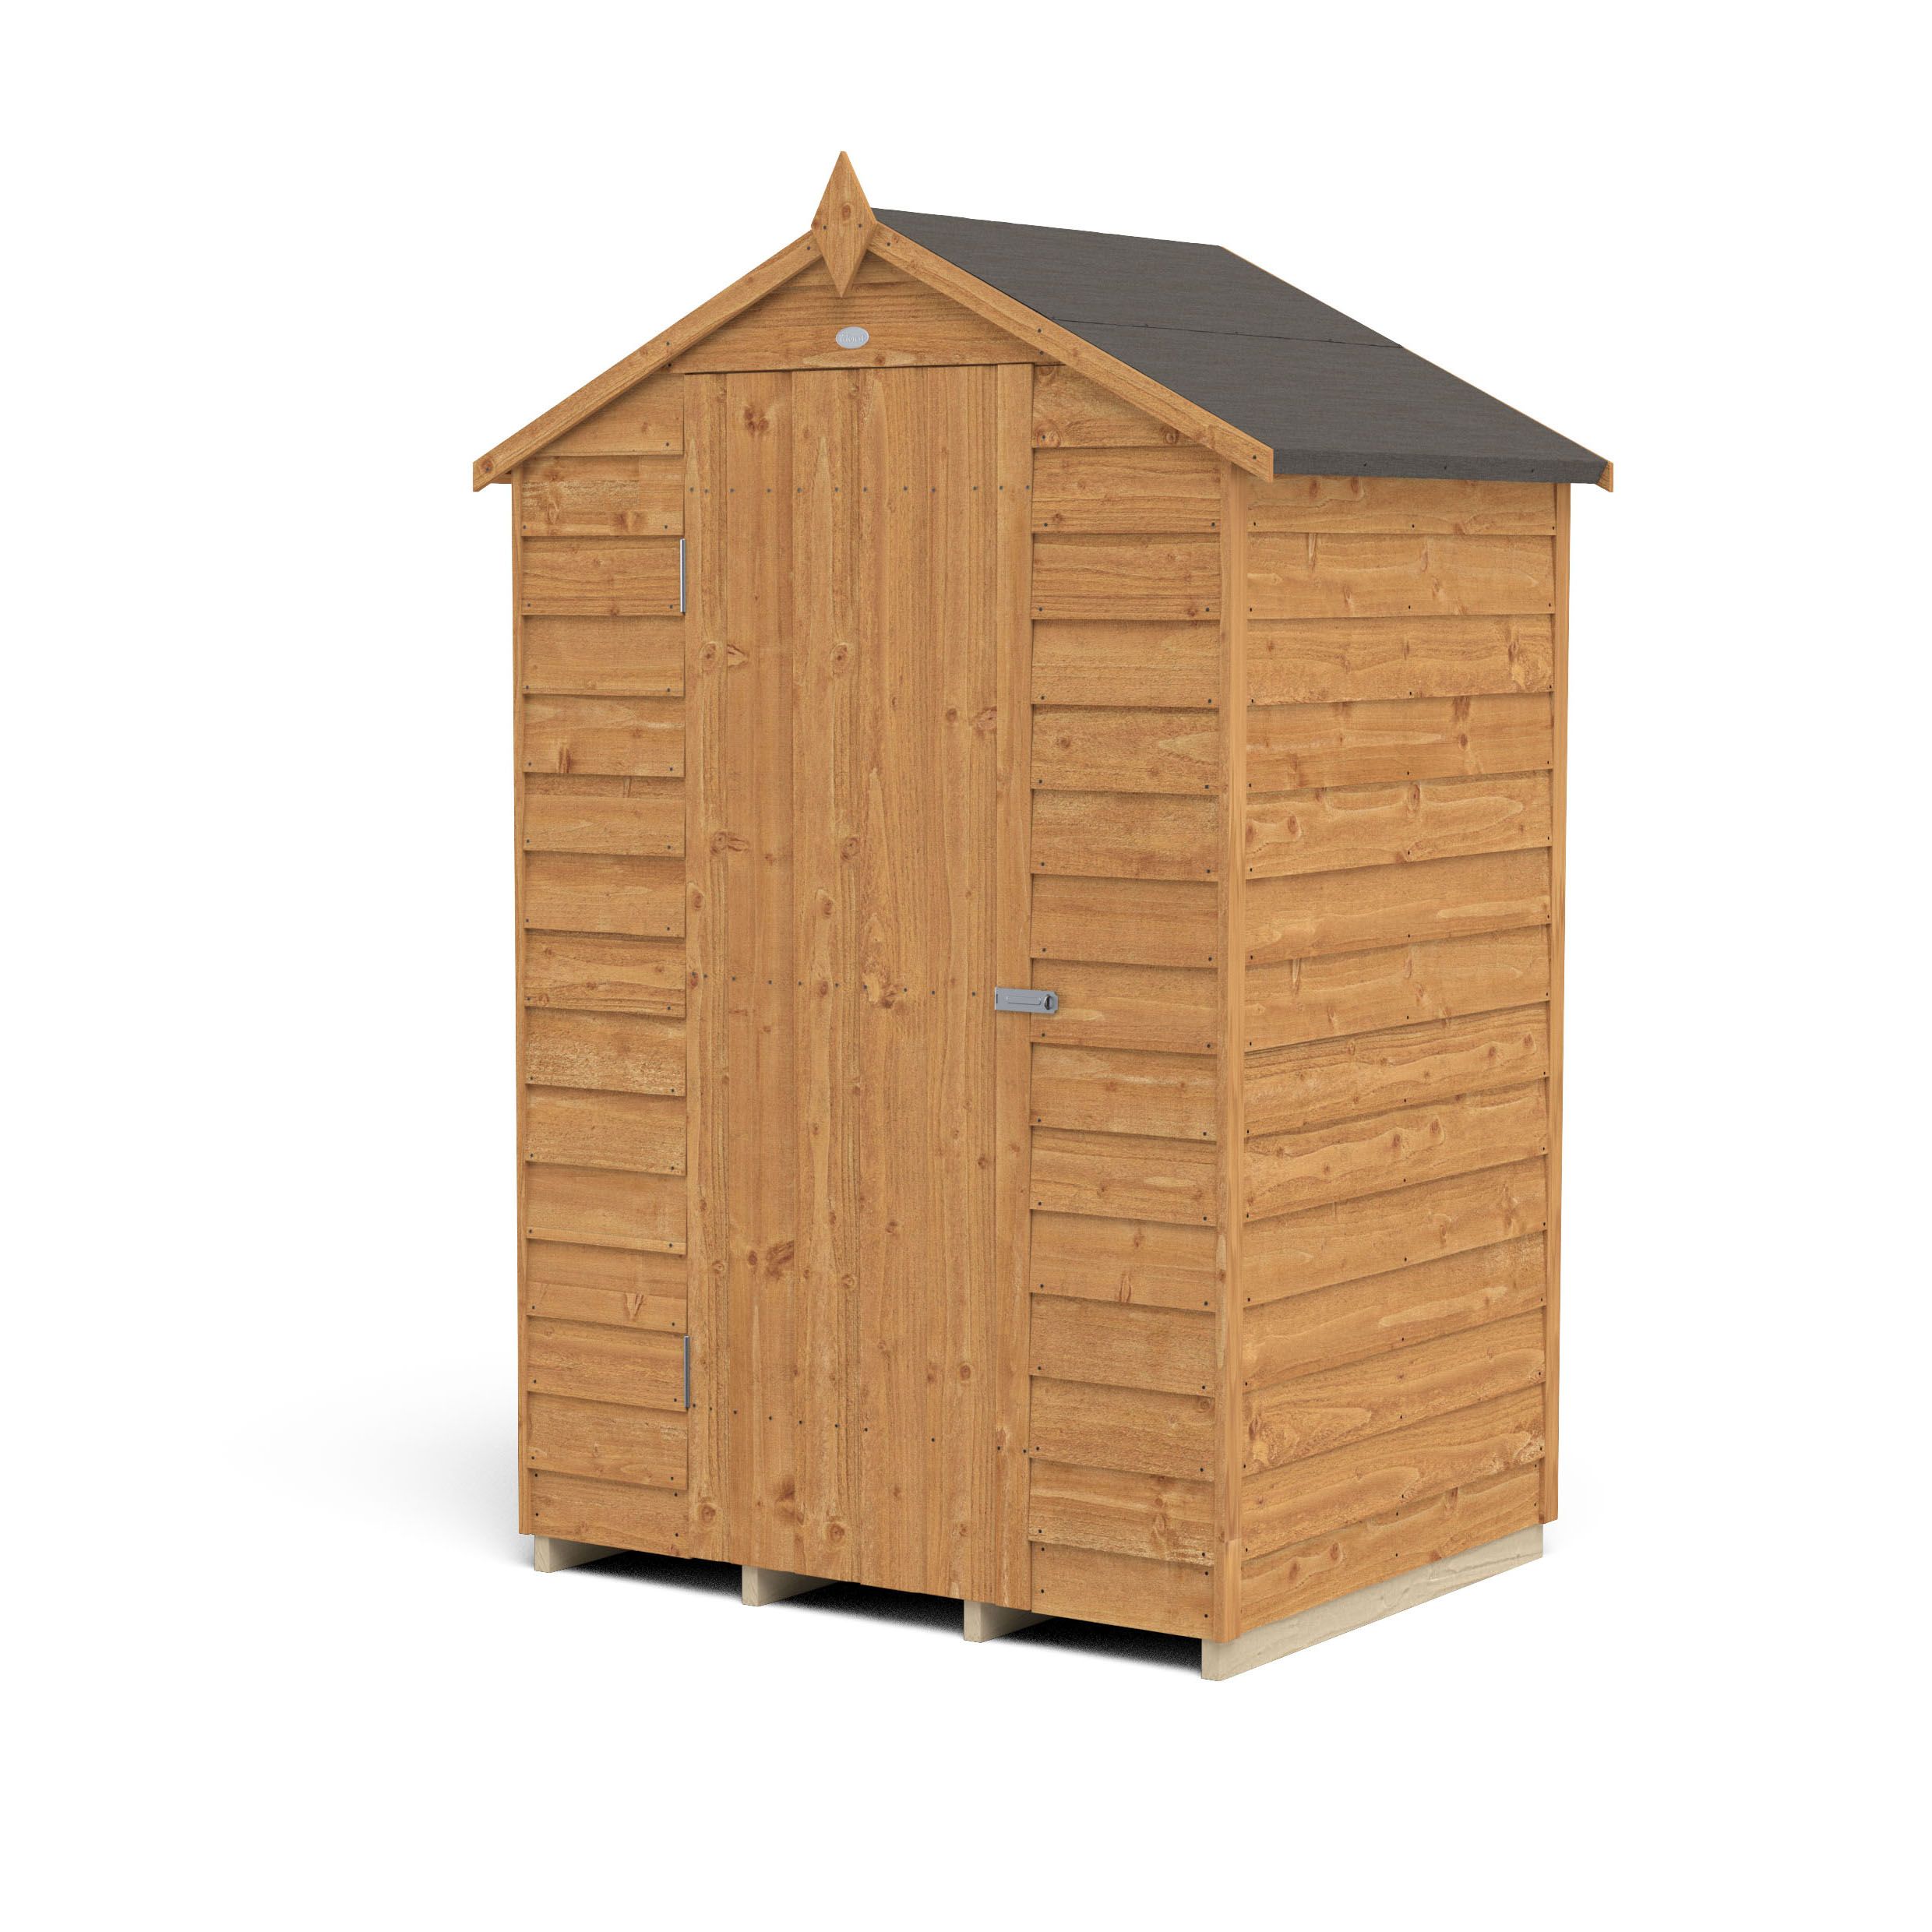 Forest Garden Overlap 4x3 ft Apex Wooden Dip treated Shed with floor